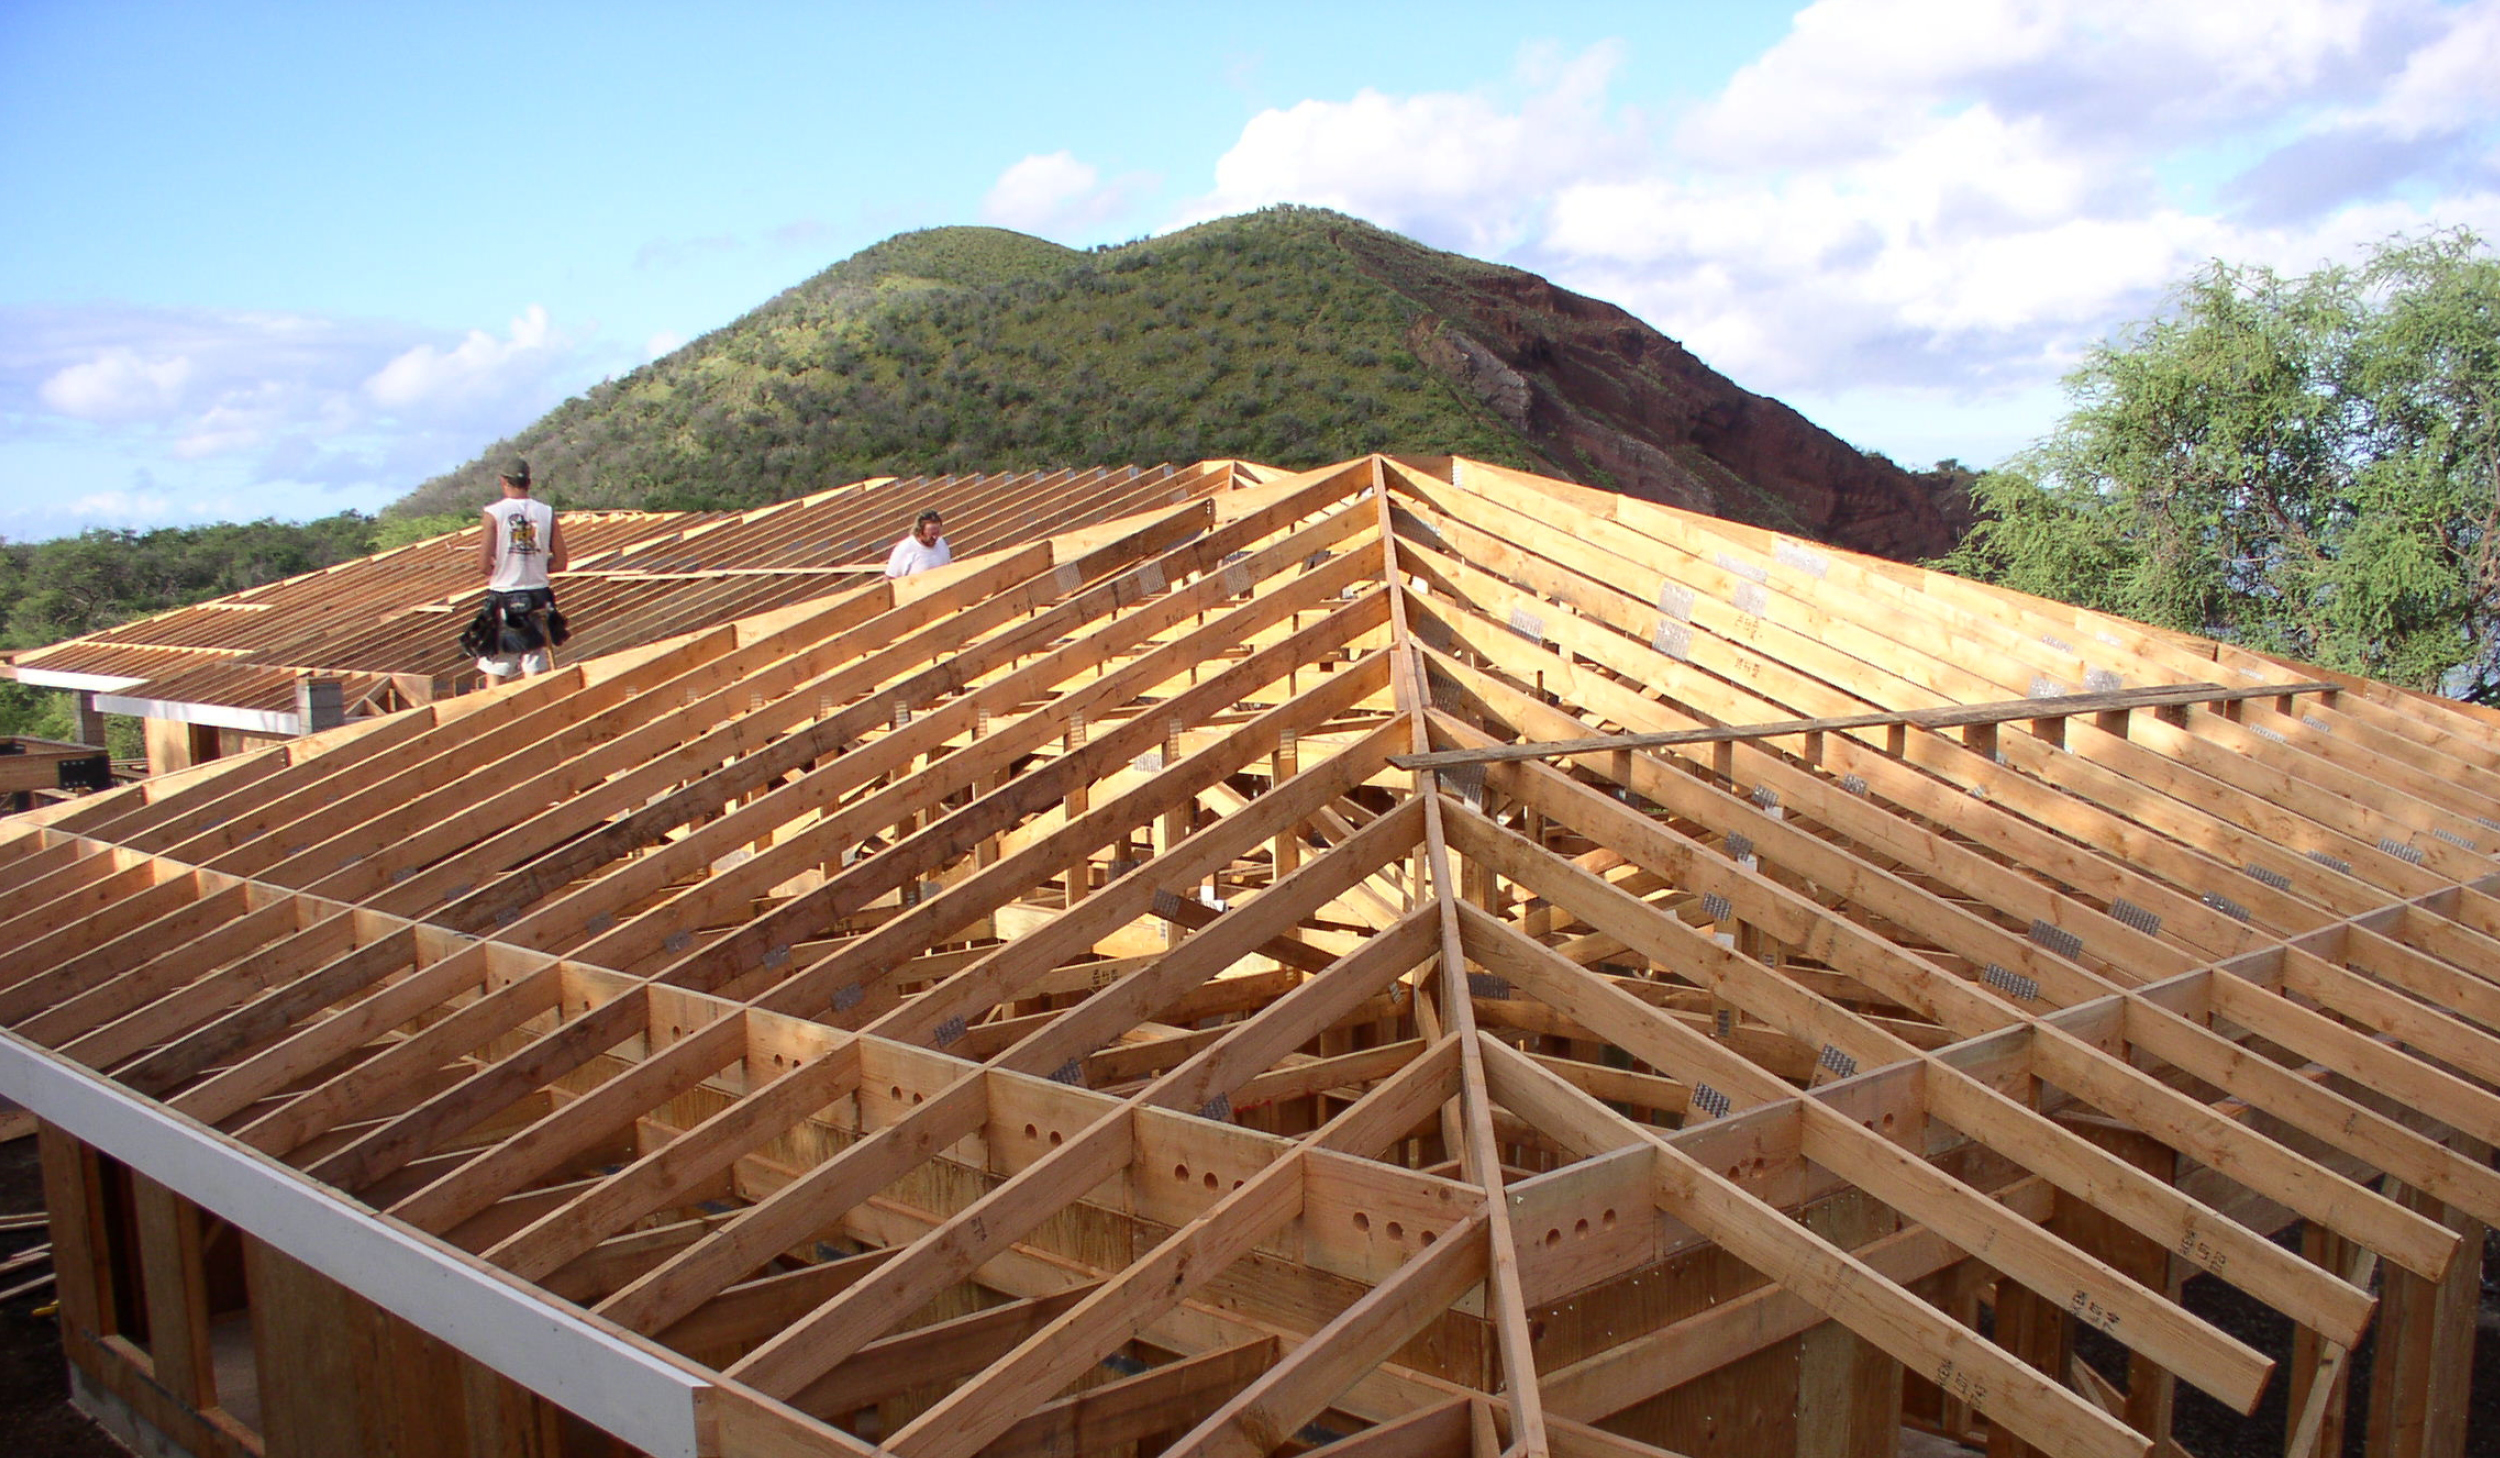 Timber Truss Roof Details - Image to u